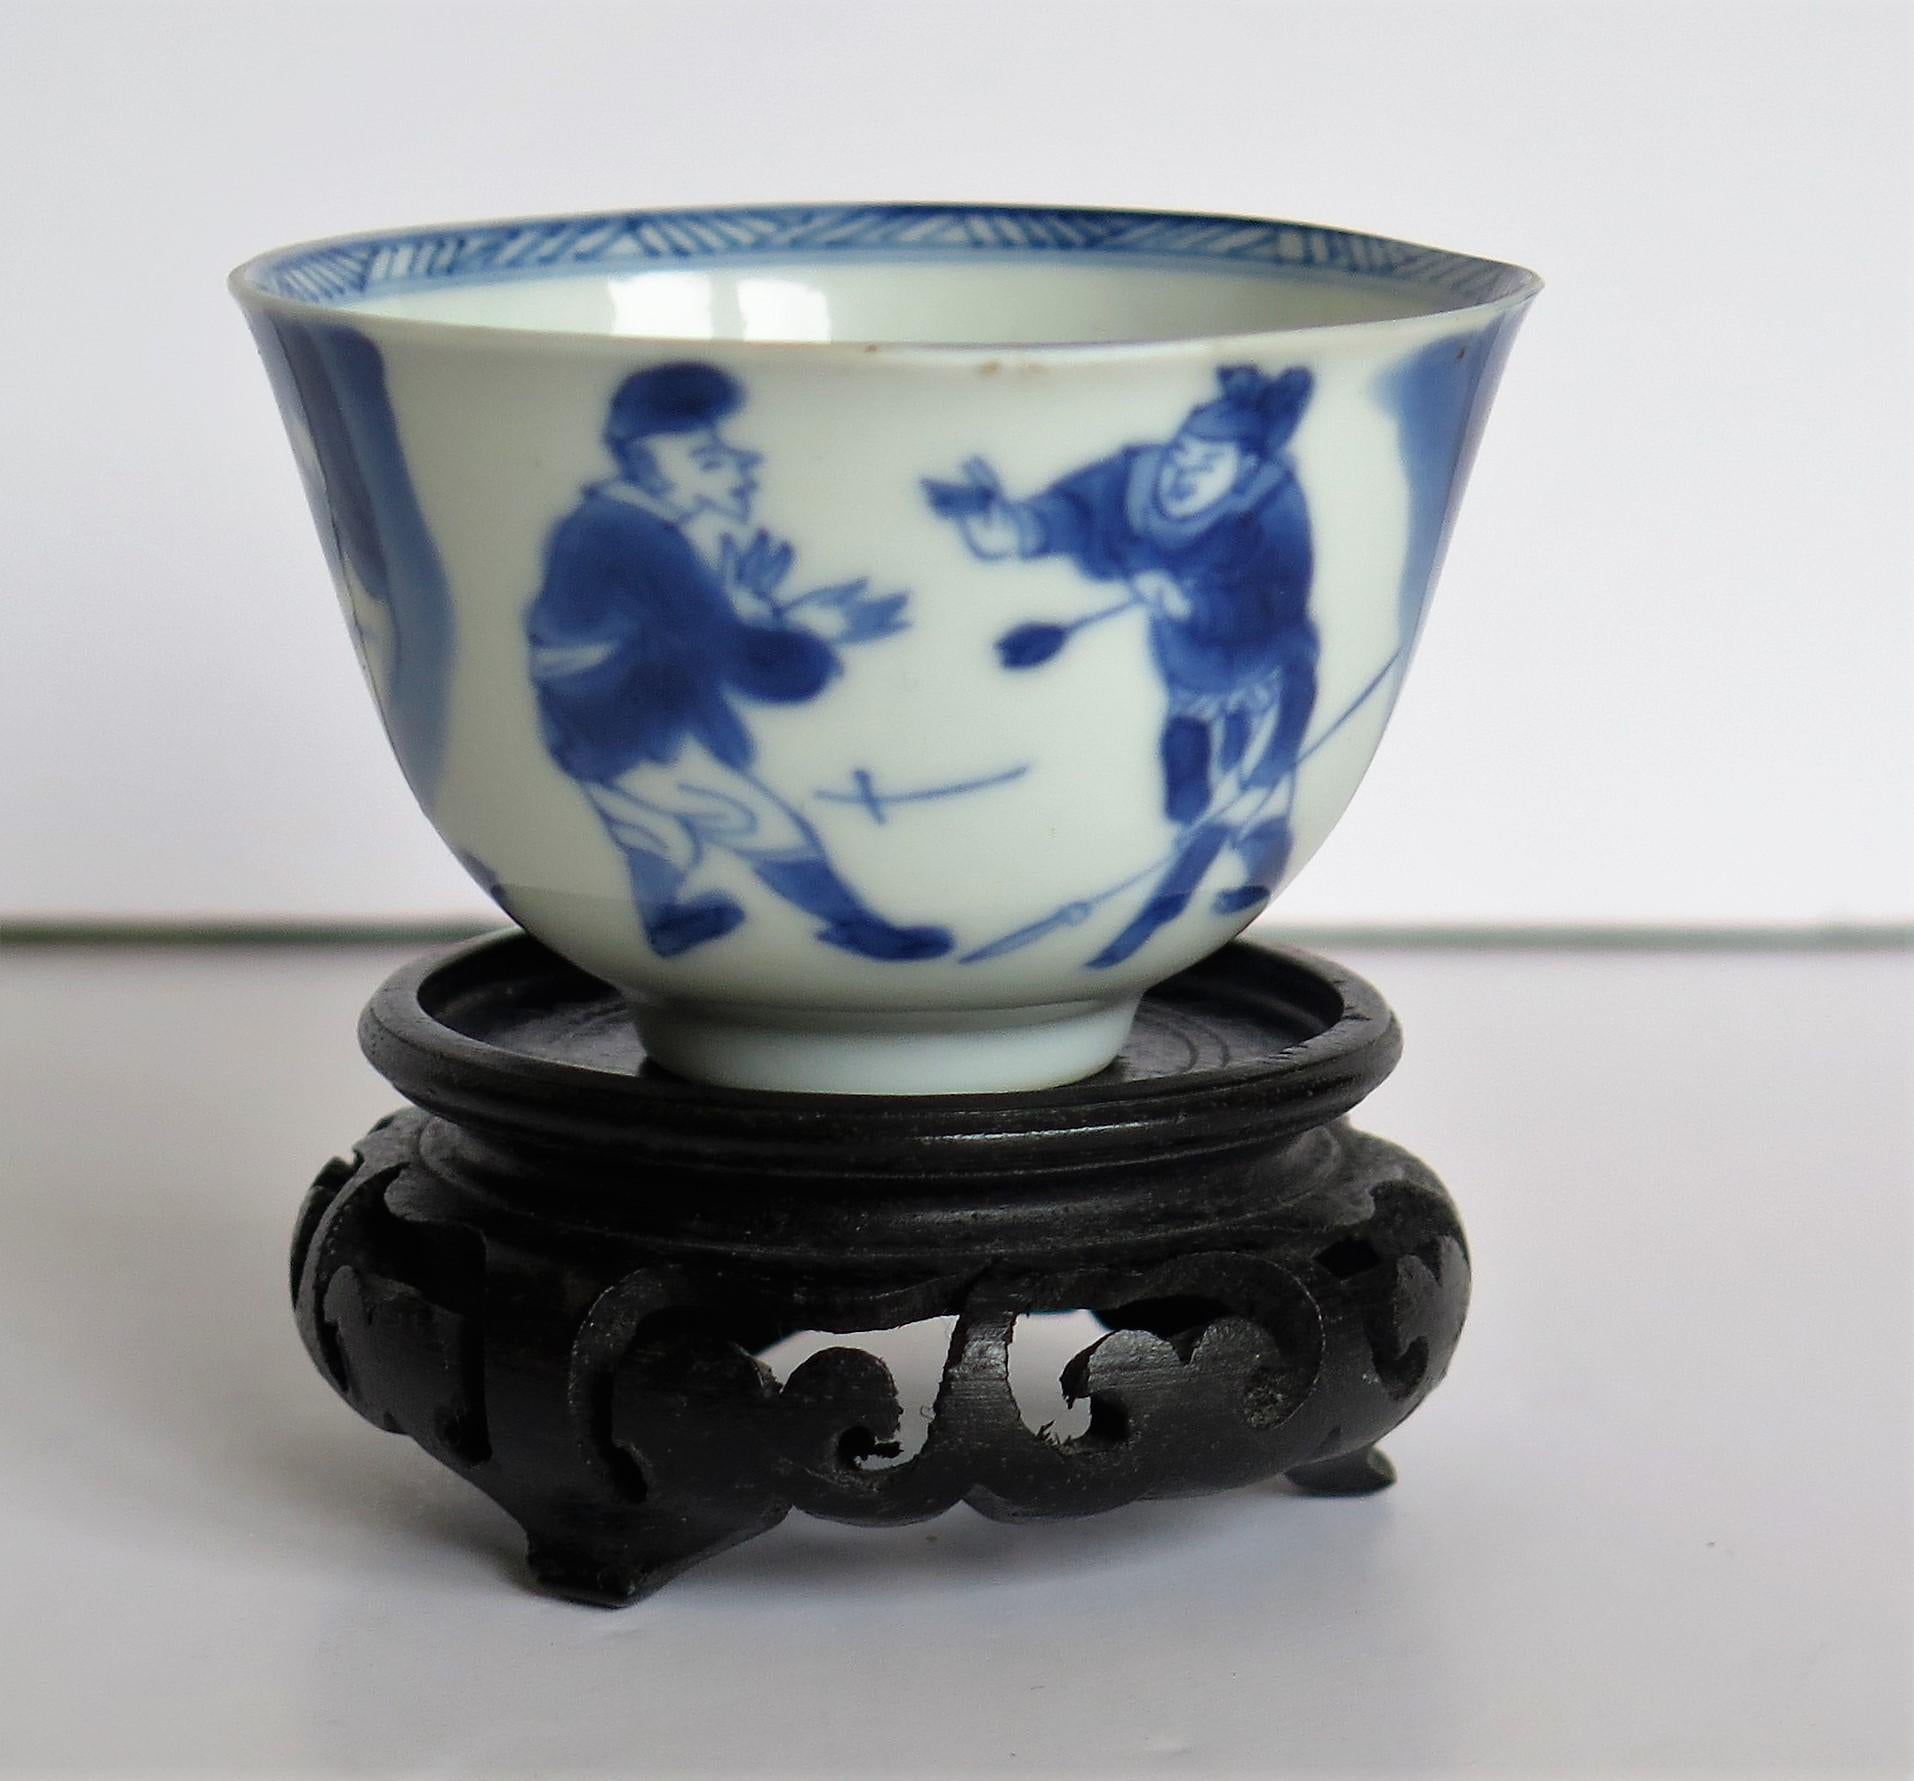 This is a beautifully hand painted Chinese porcelain blue and white Tea Bowl from the Qing, Kangxi period, 1662-1722, with a hand carved hard-wood Stand .

The tea bowl is very finely potted with a carefully cut base rim and a lovely rich glassy